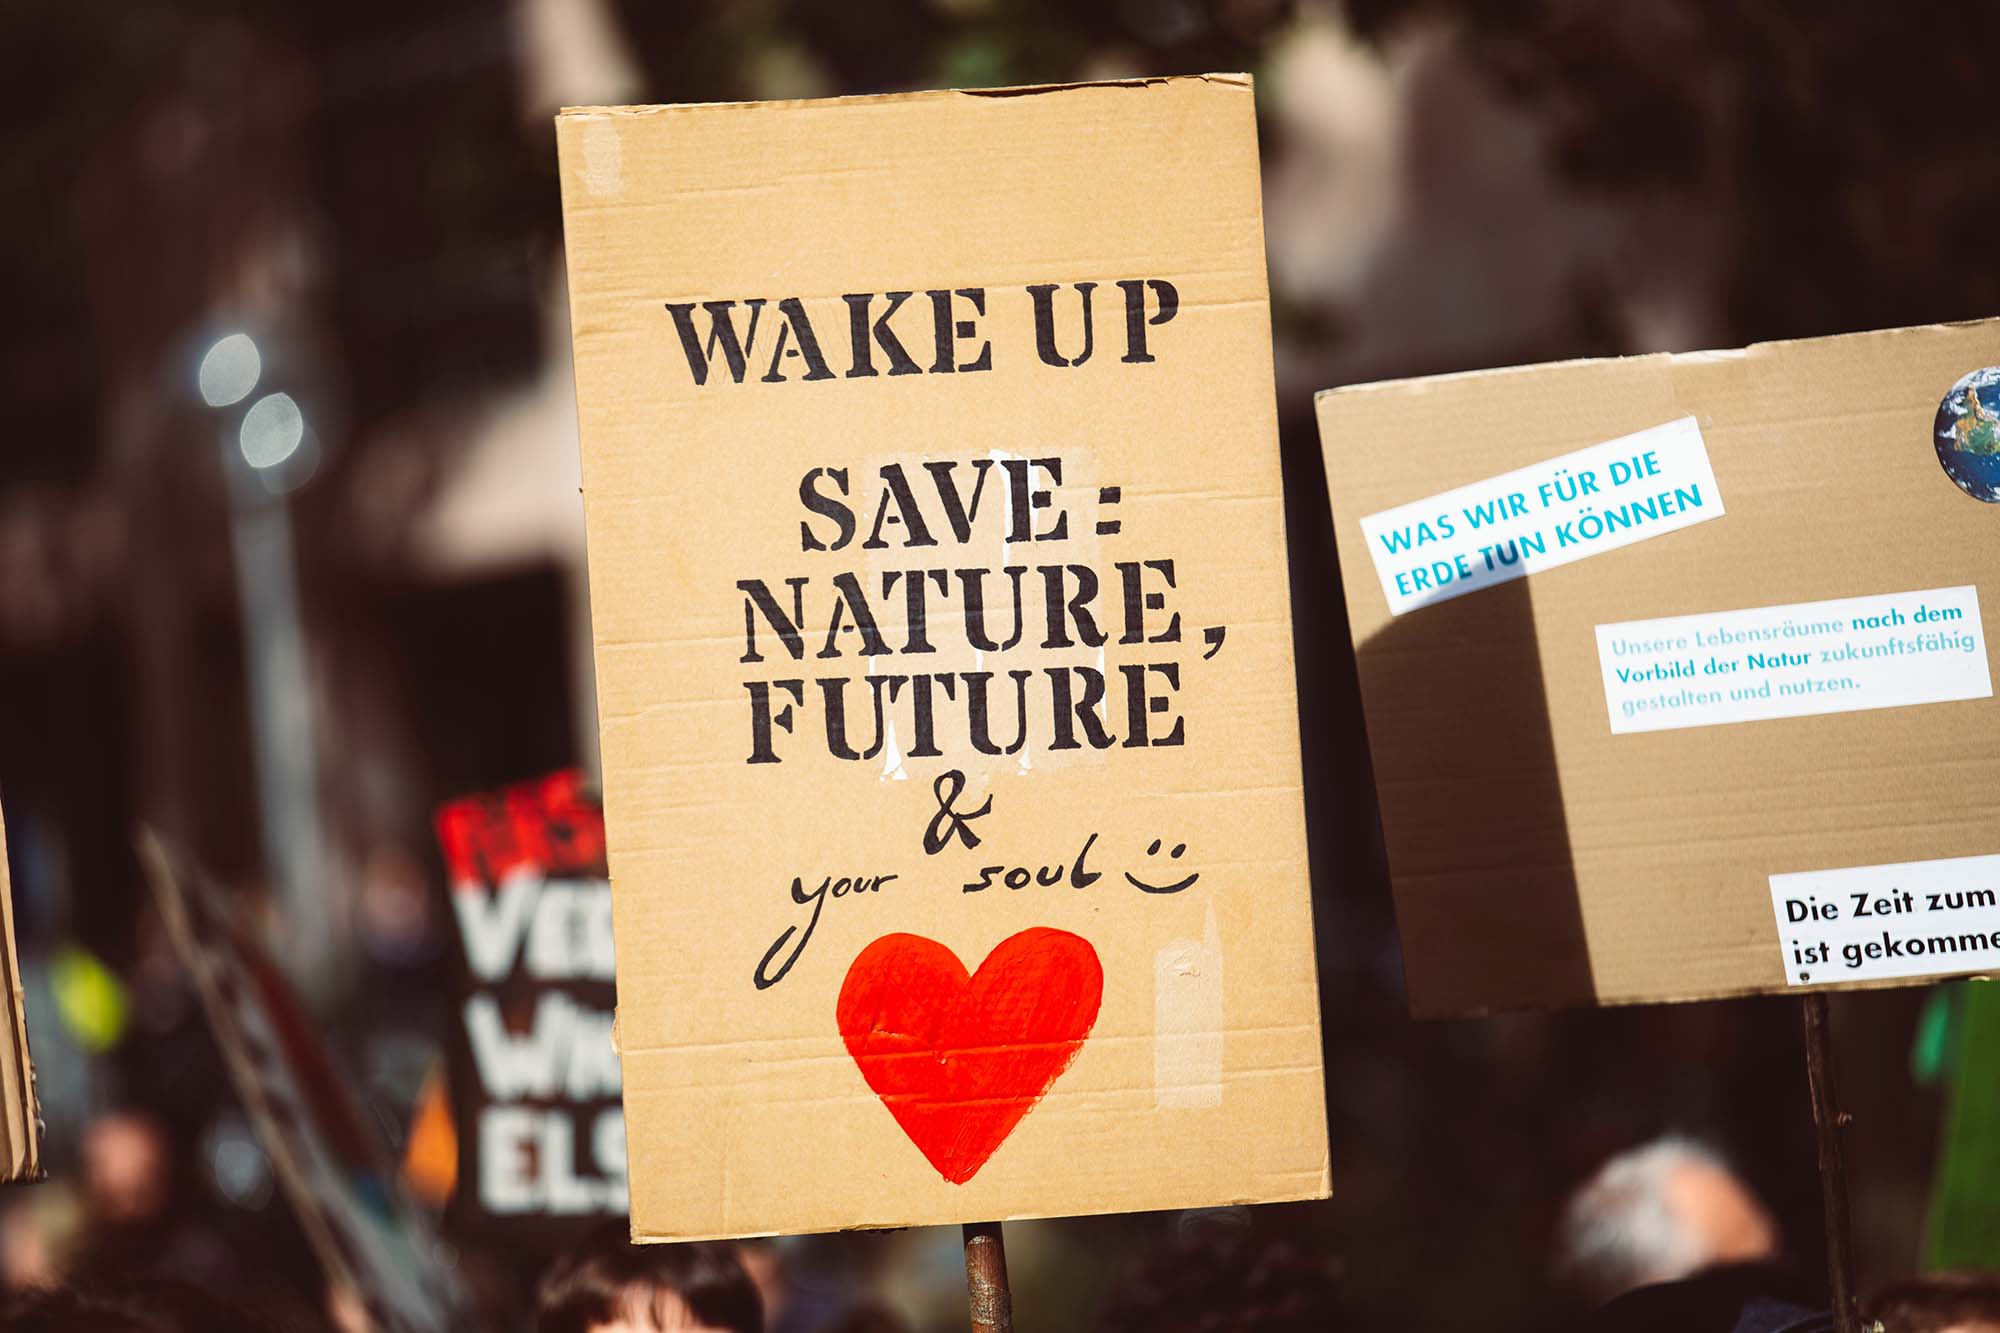 A protester's sign reading "wake up save: nature, future & your soul :)"